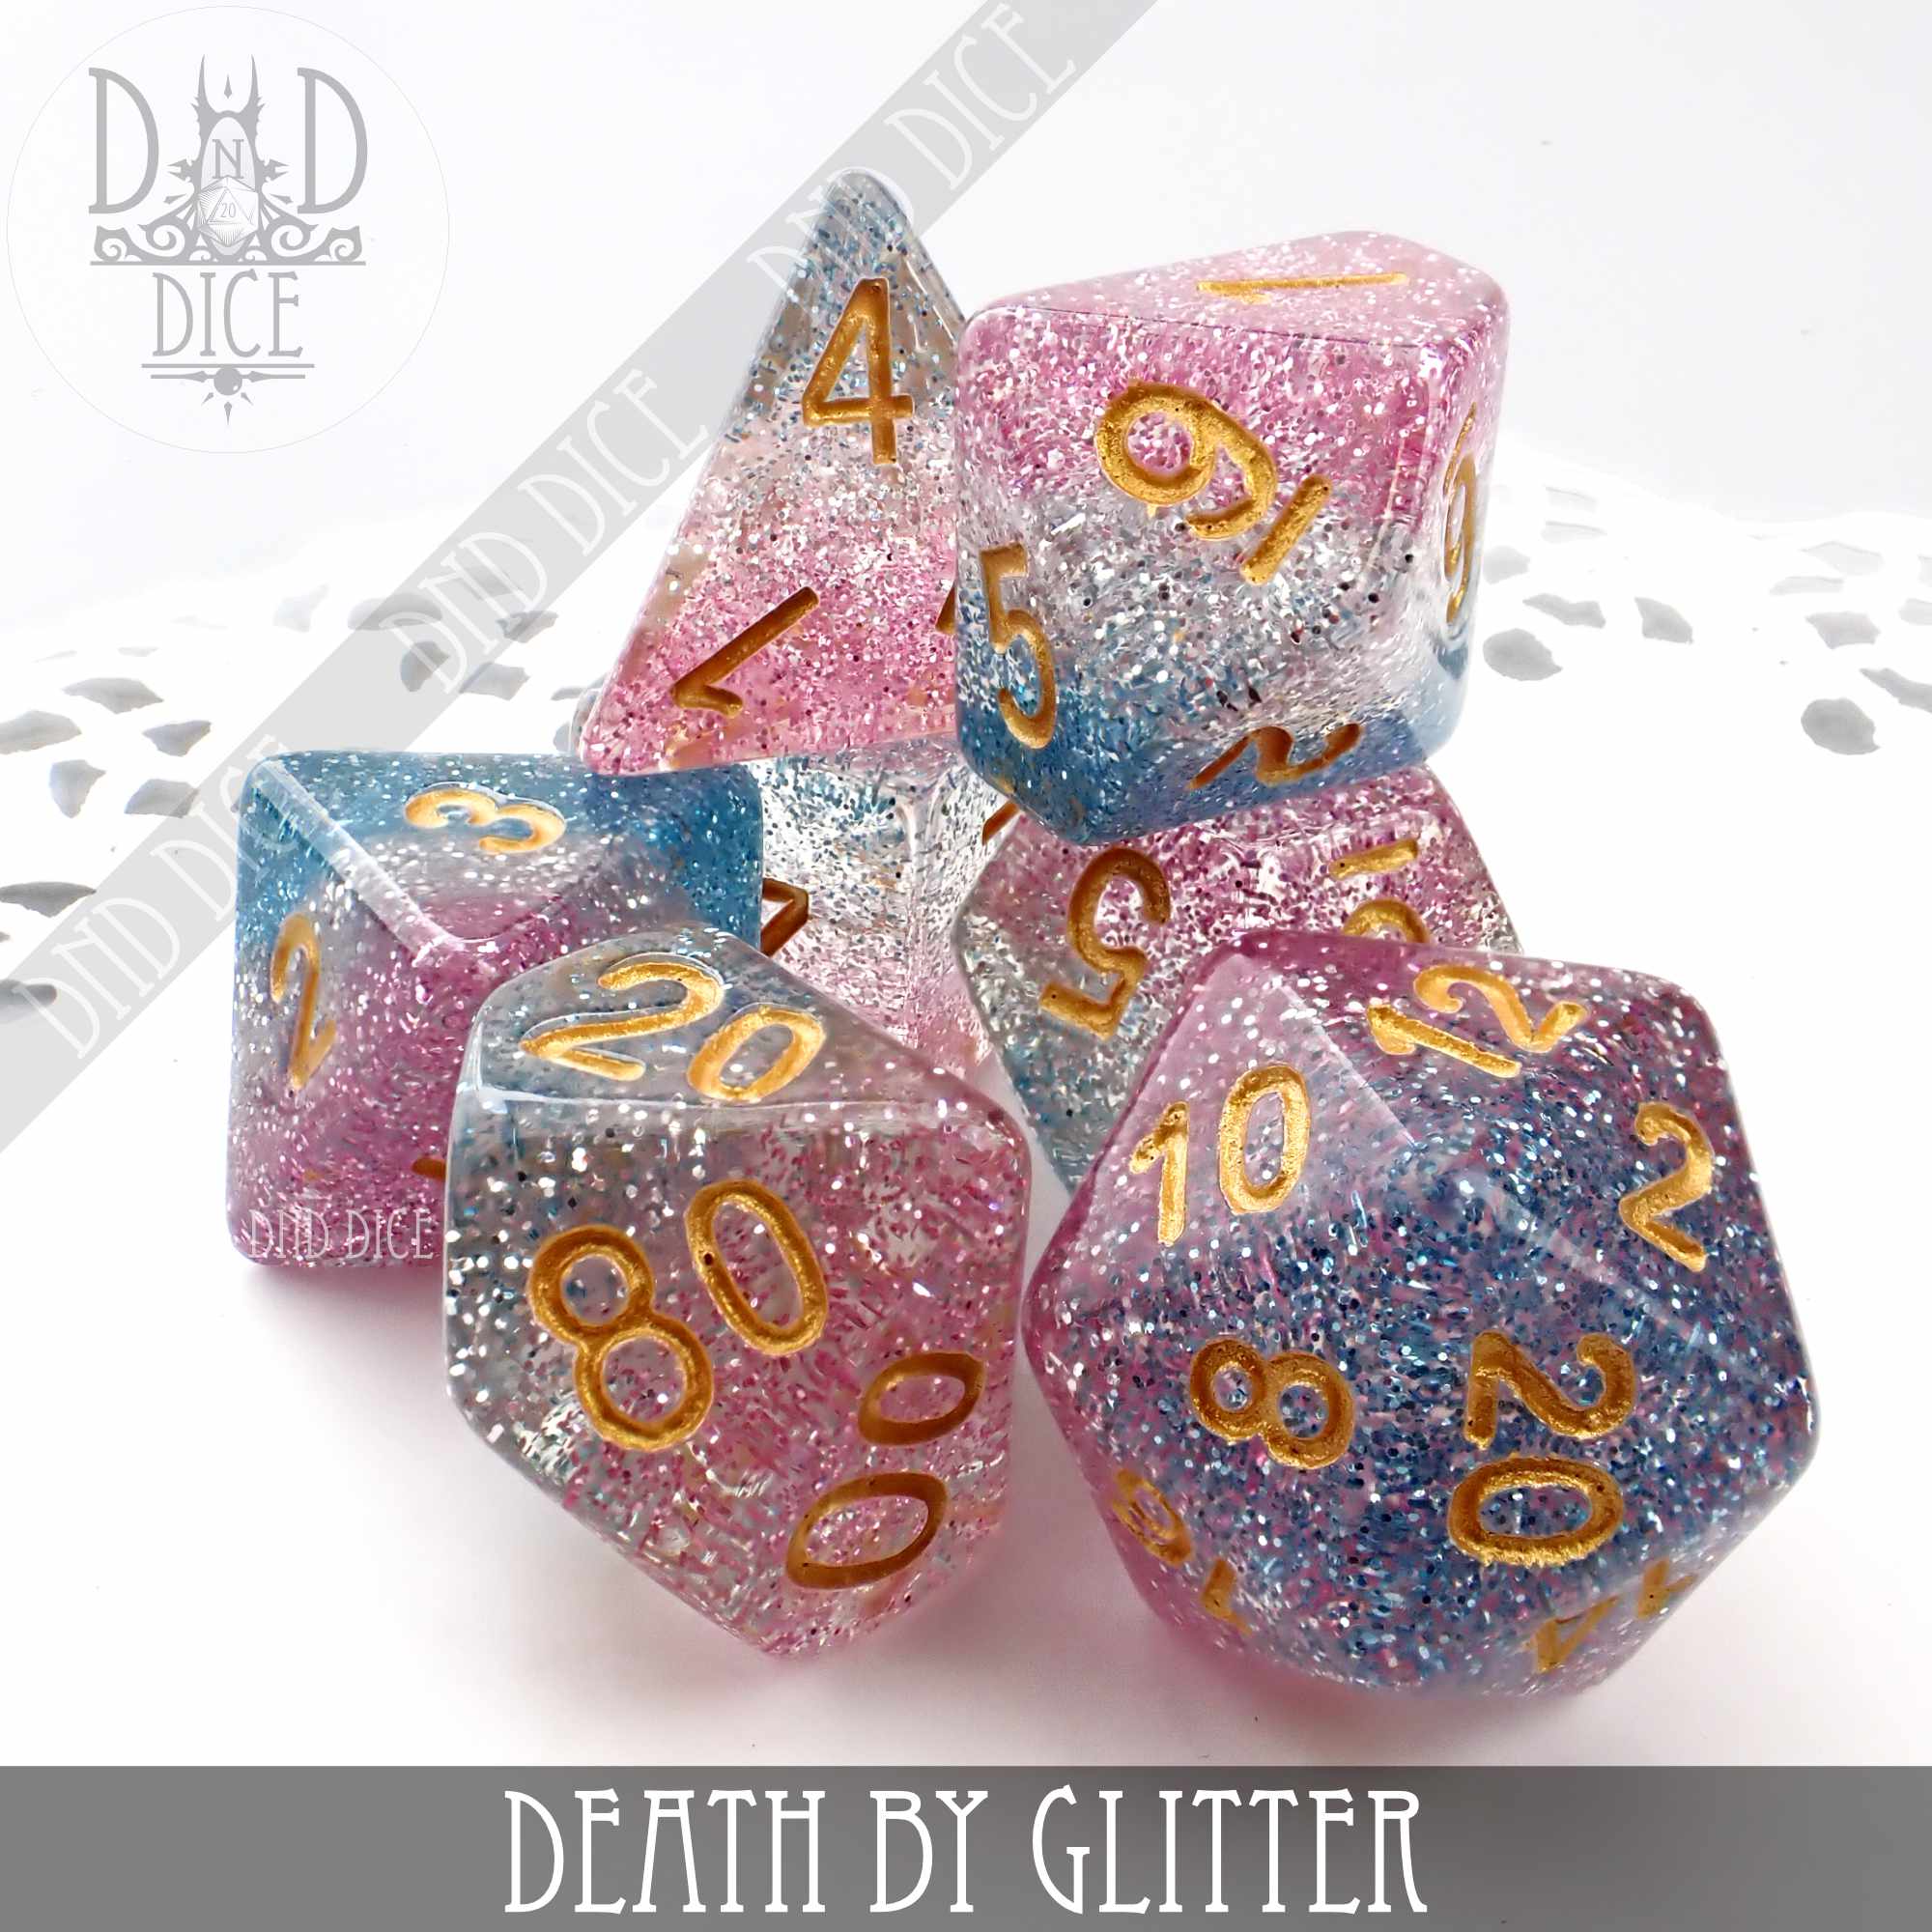 Death By Glitter Dice Set